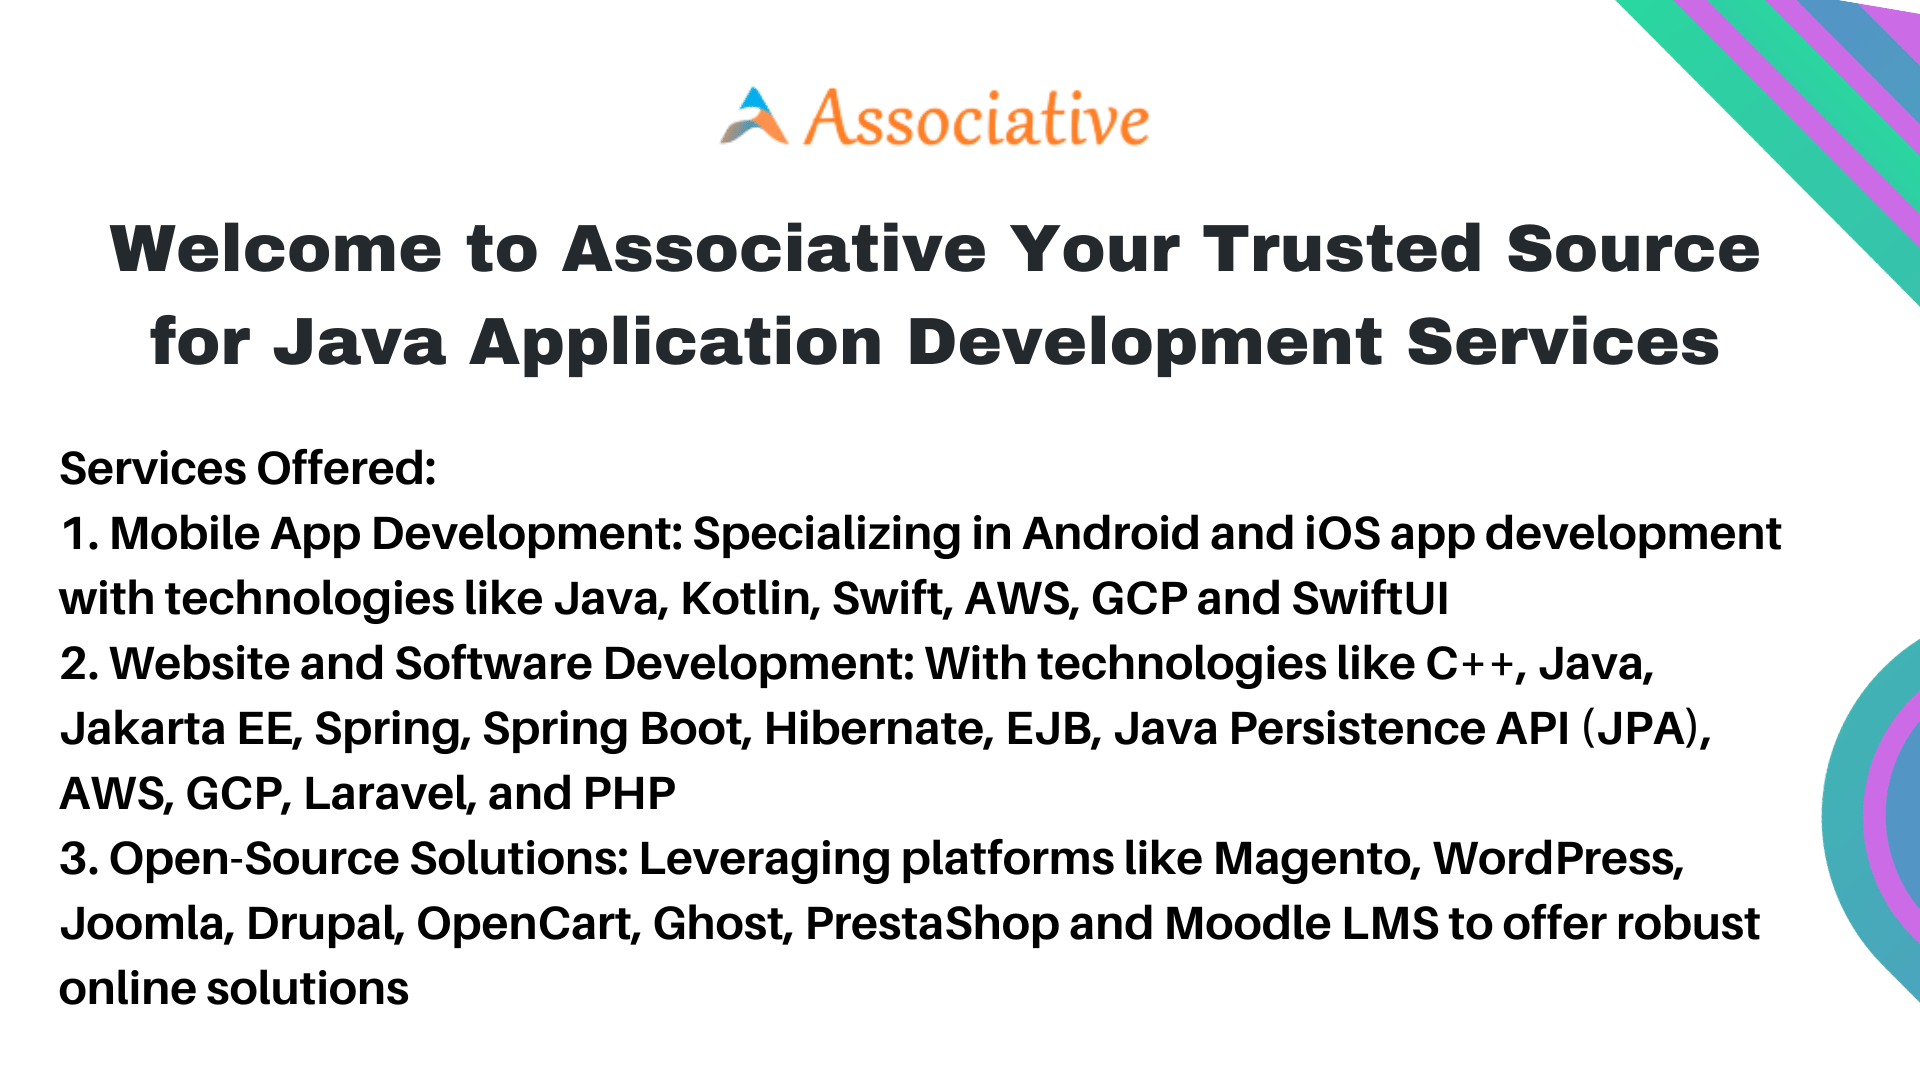 Welcome to Associative Your Trusted Source for Java Application Development Services